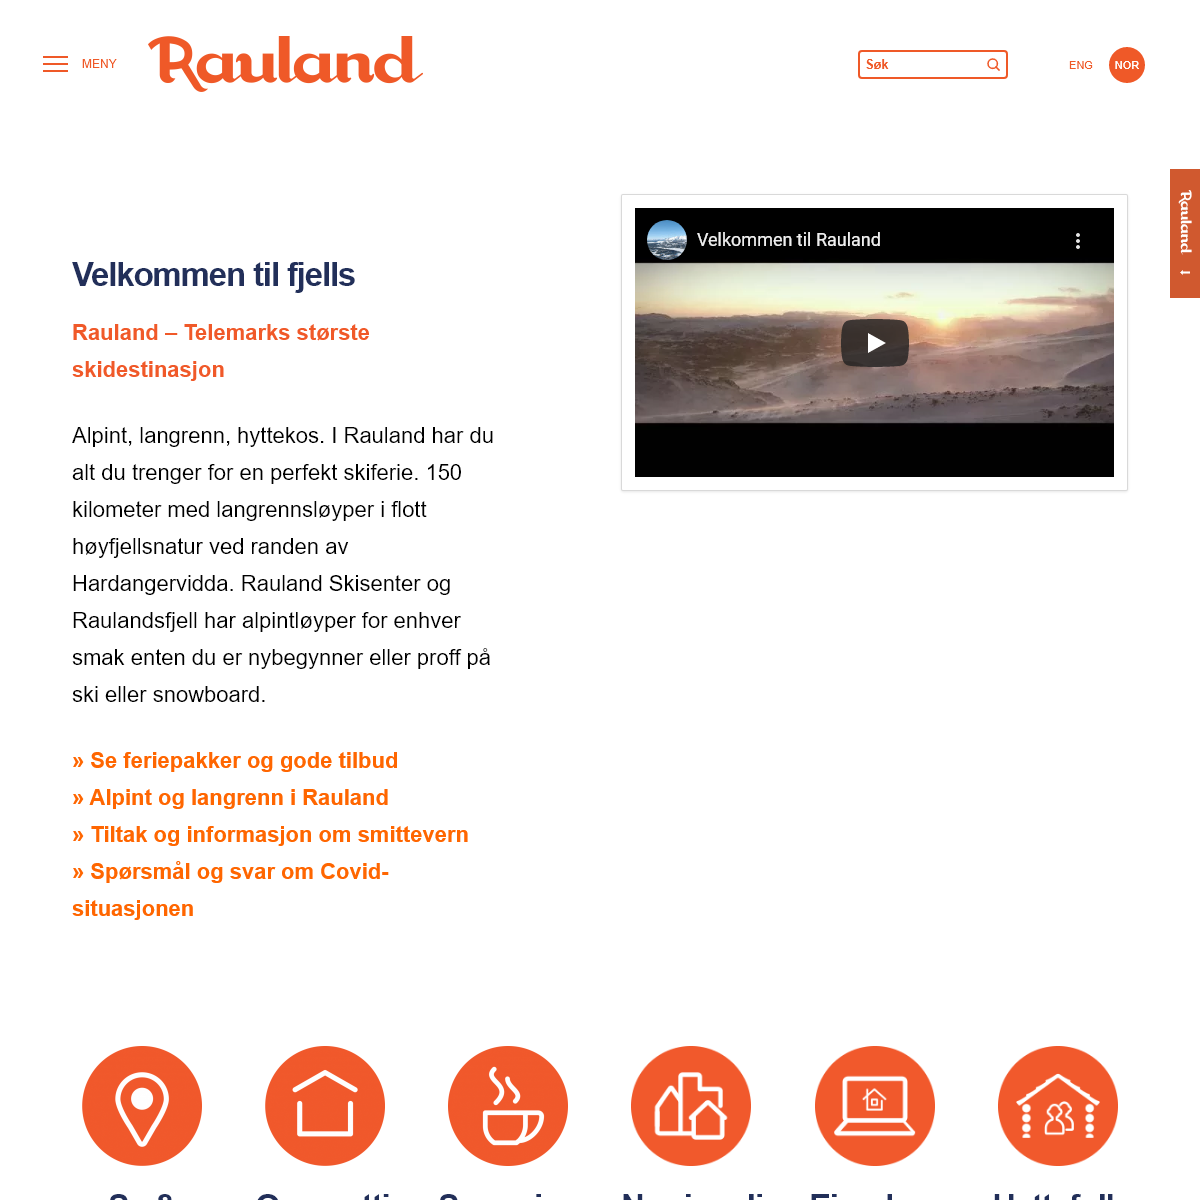 A complete backup of visitrauland.com